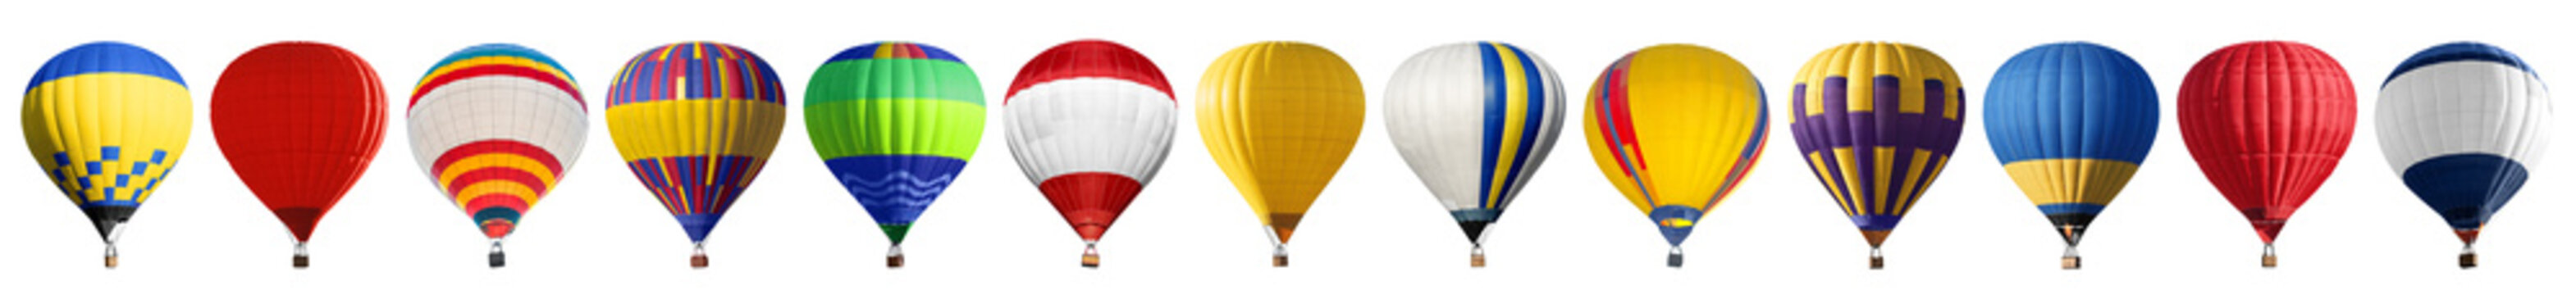 Set of bright colorful hot air balloons on white background